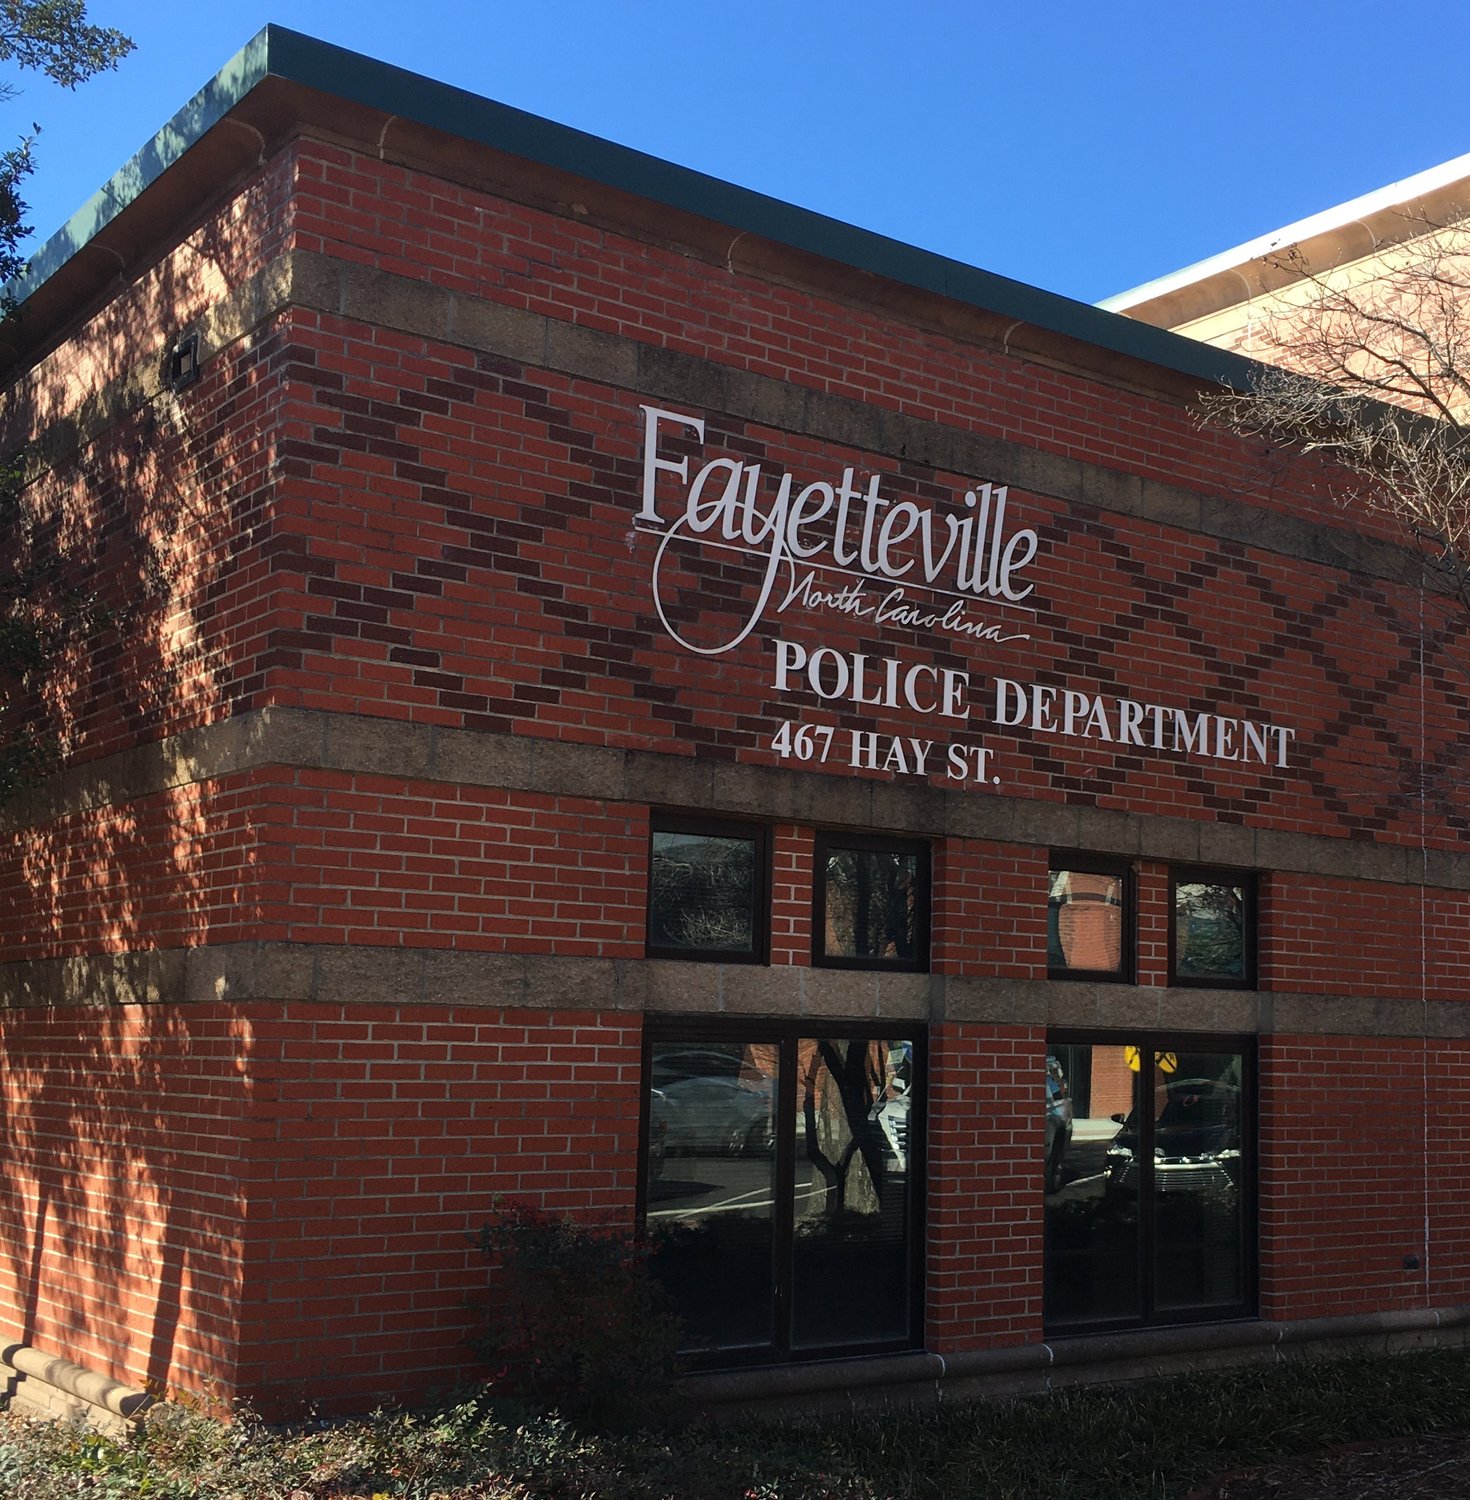 The Fayetteville Police Department said license plate reader cameras have helped the department make more than 100 arrests, recover more than 30 stolen vehicles and seize three firearms.